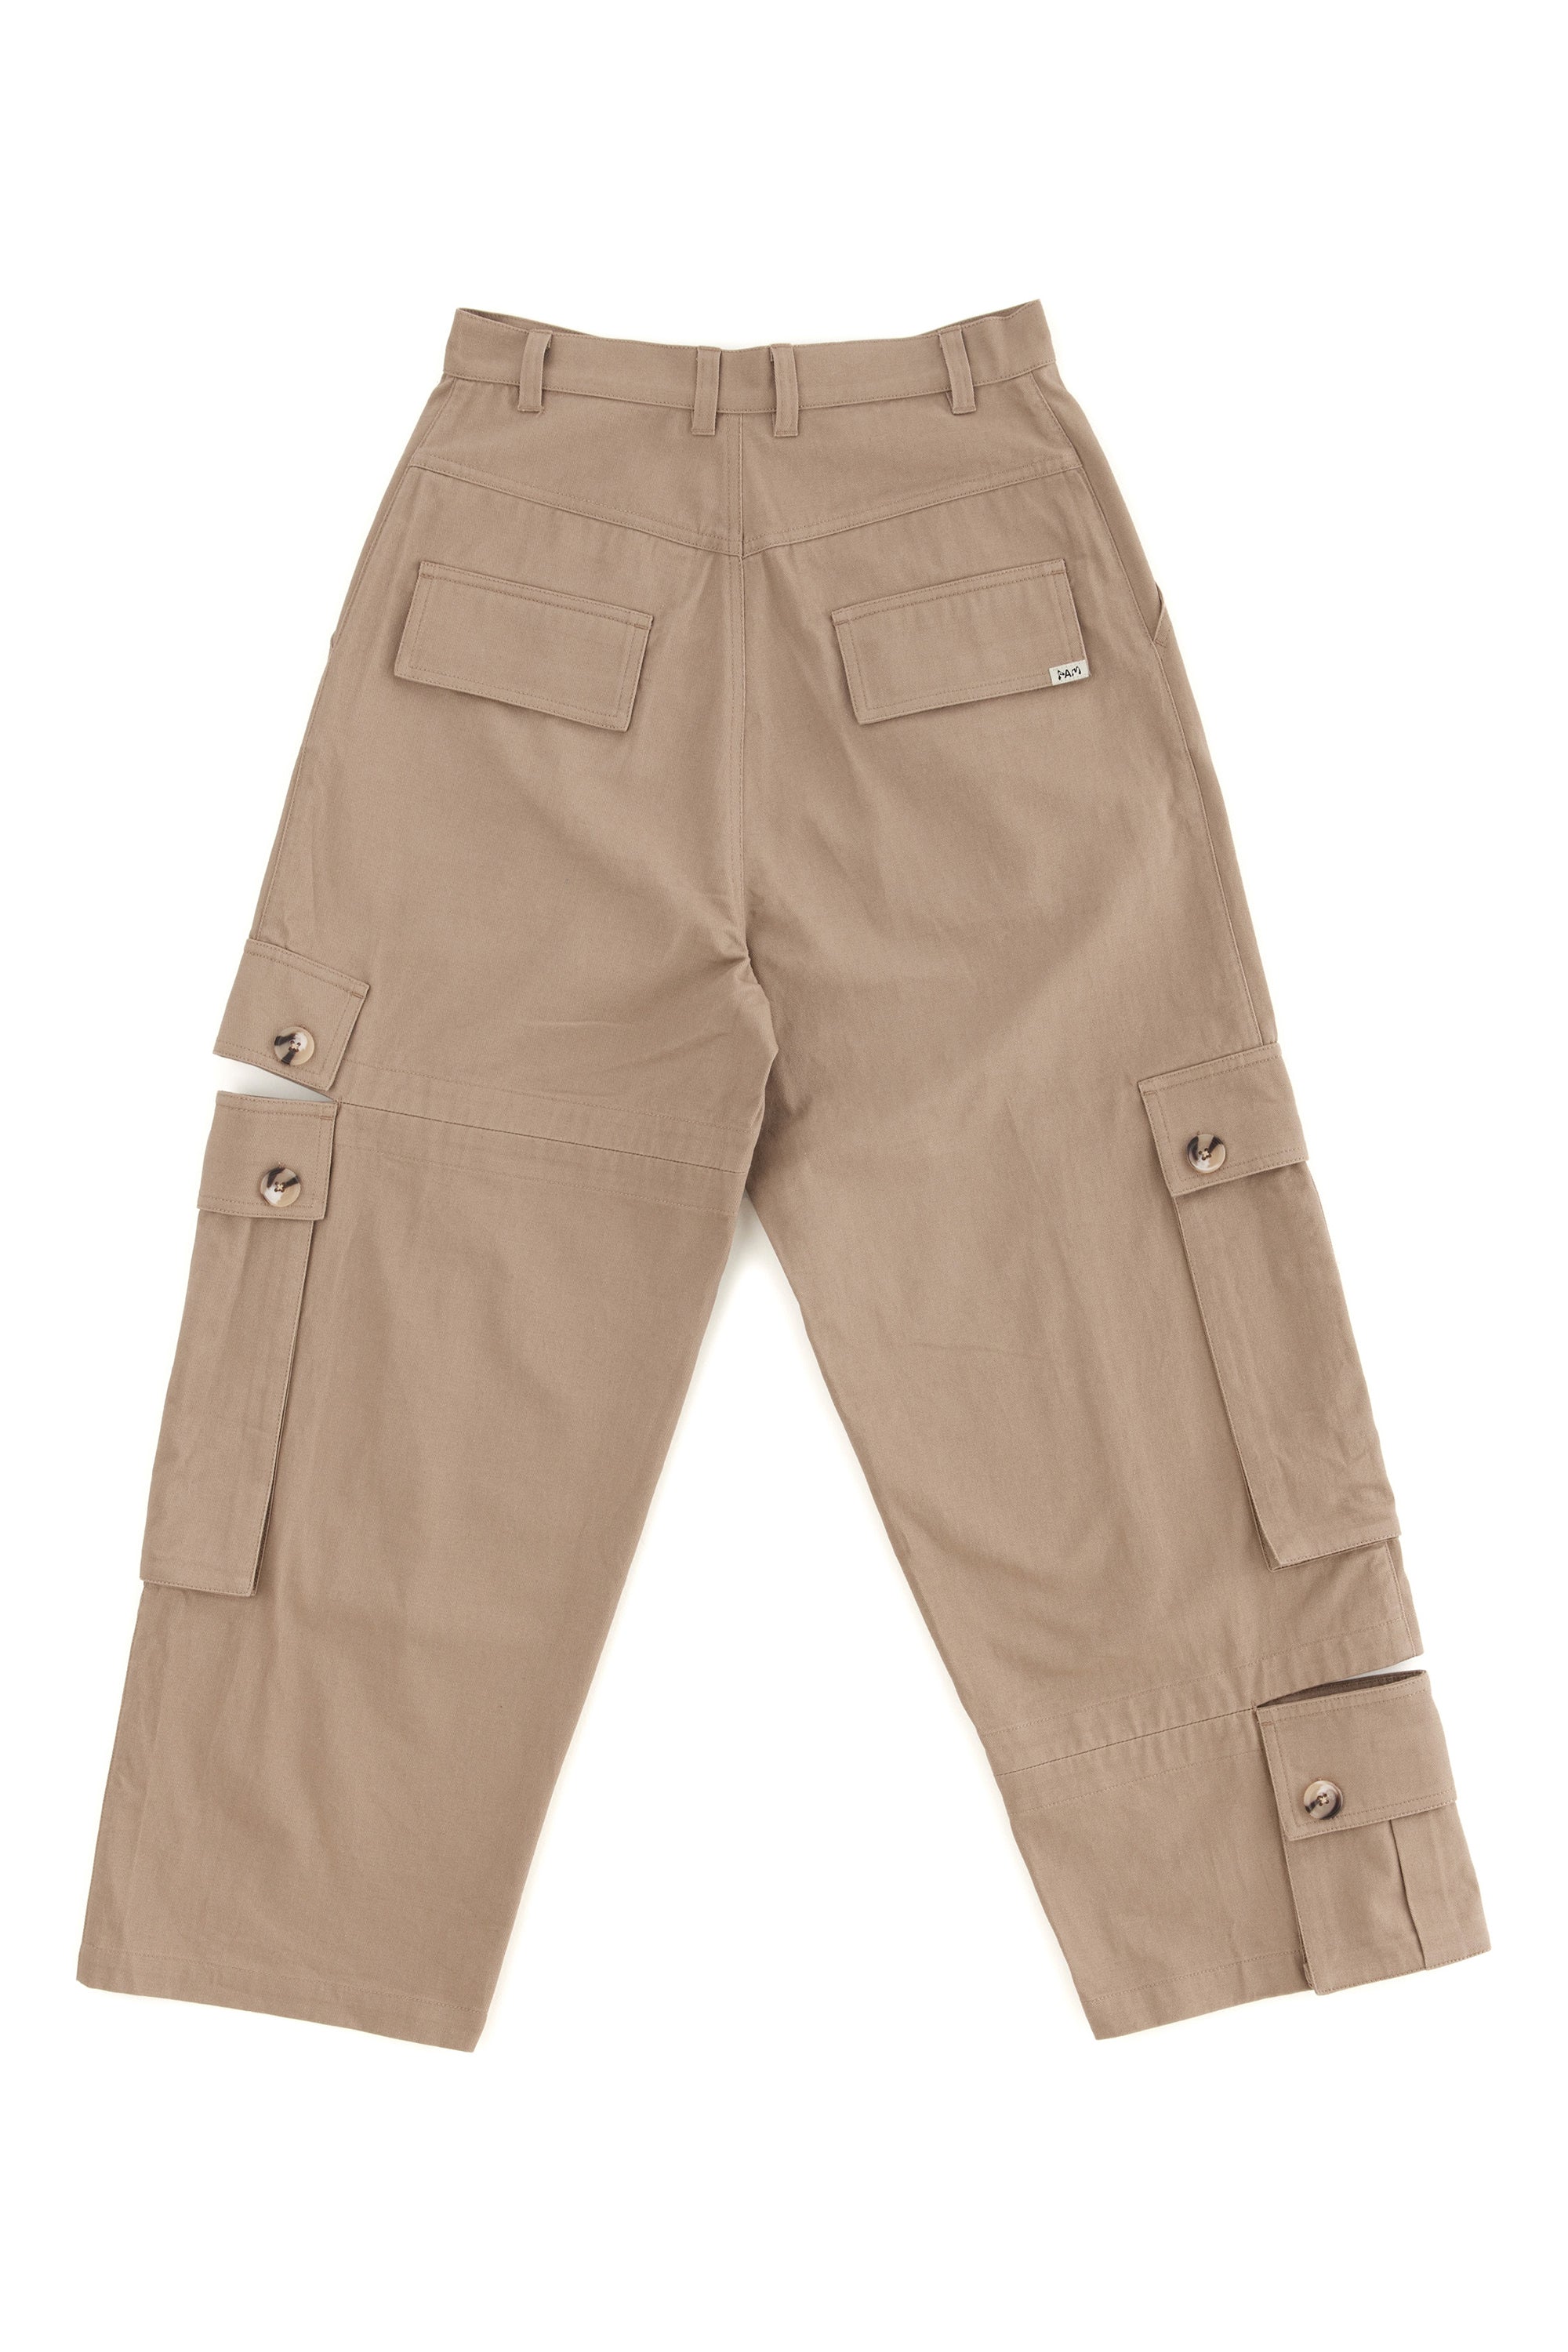 The CARGO BRI BRI PANT  available online with global shipping, and in PAM Stores Melbourne and Sydney.